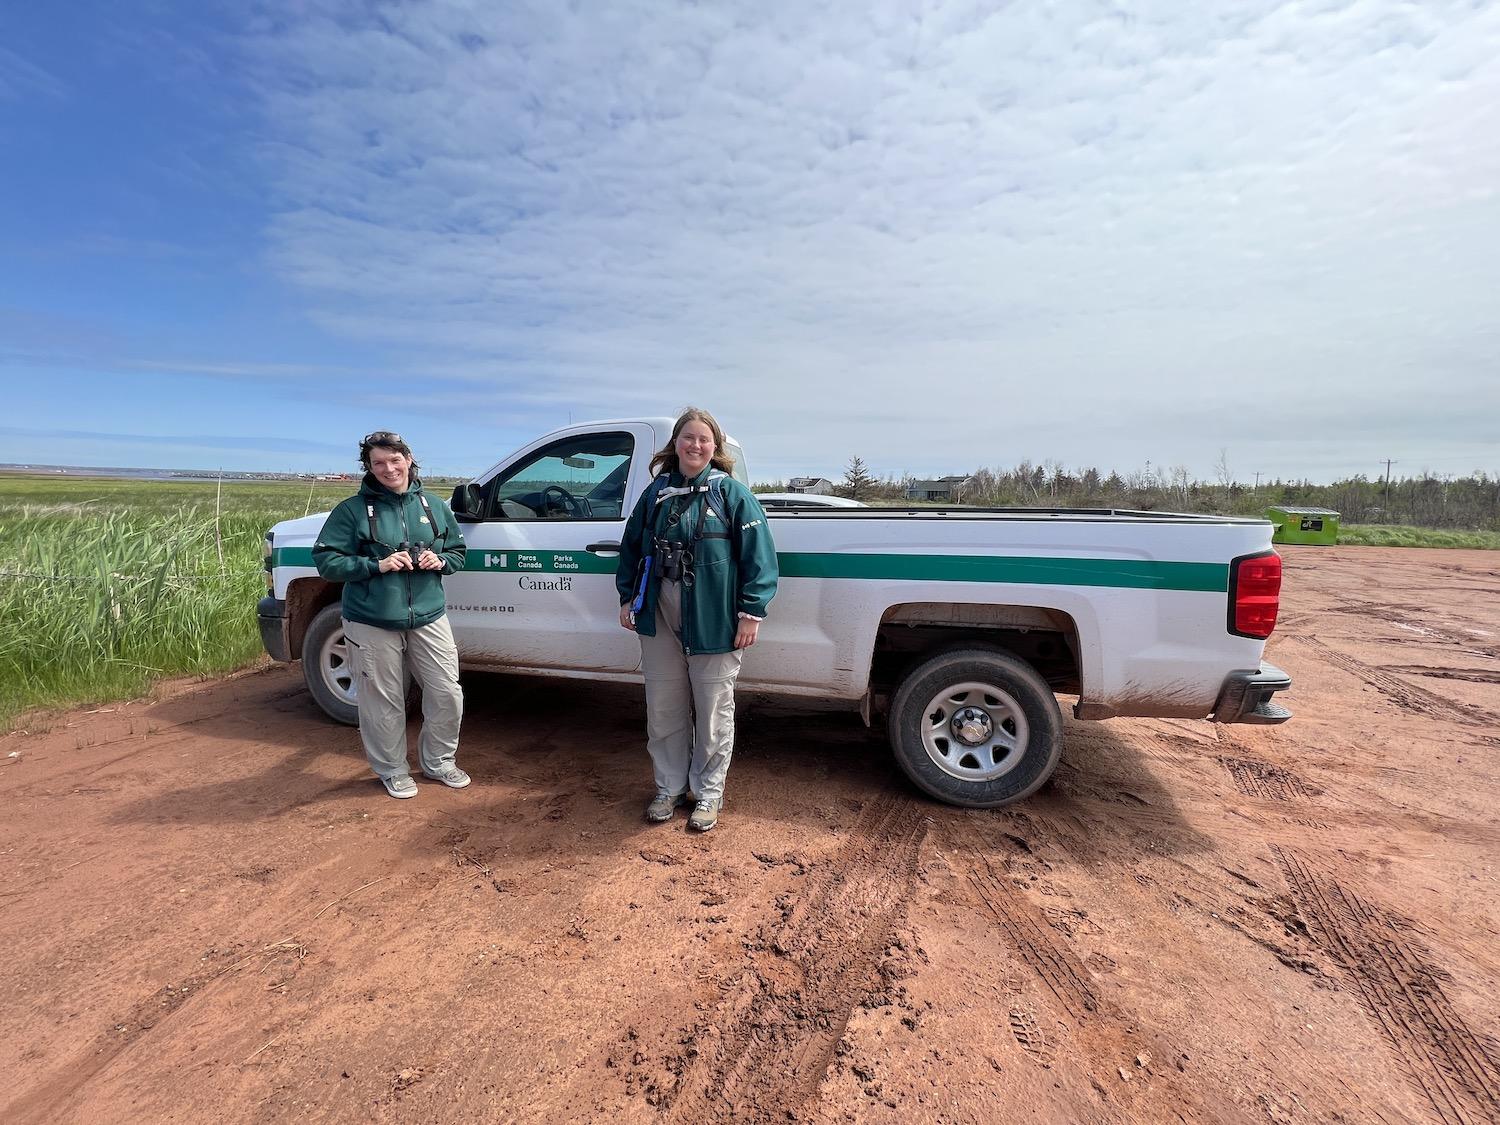 Parks Canada's Stacey Evans and Lily McLaine are shown in Prince Edward Island National Park near a protected Piping Plover nesting area.